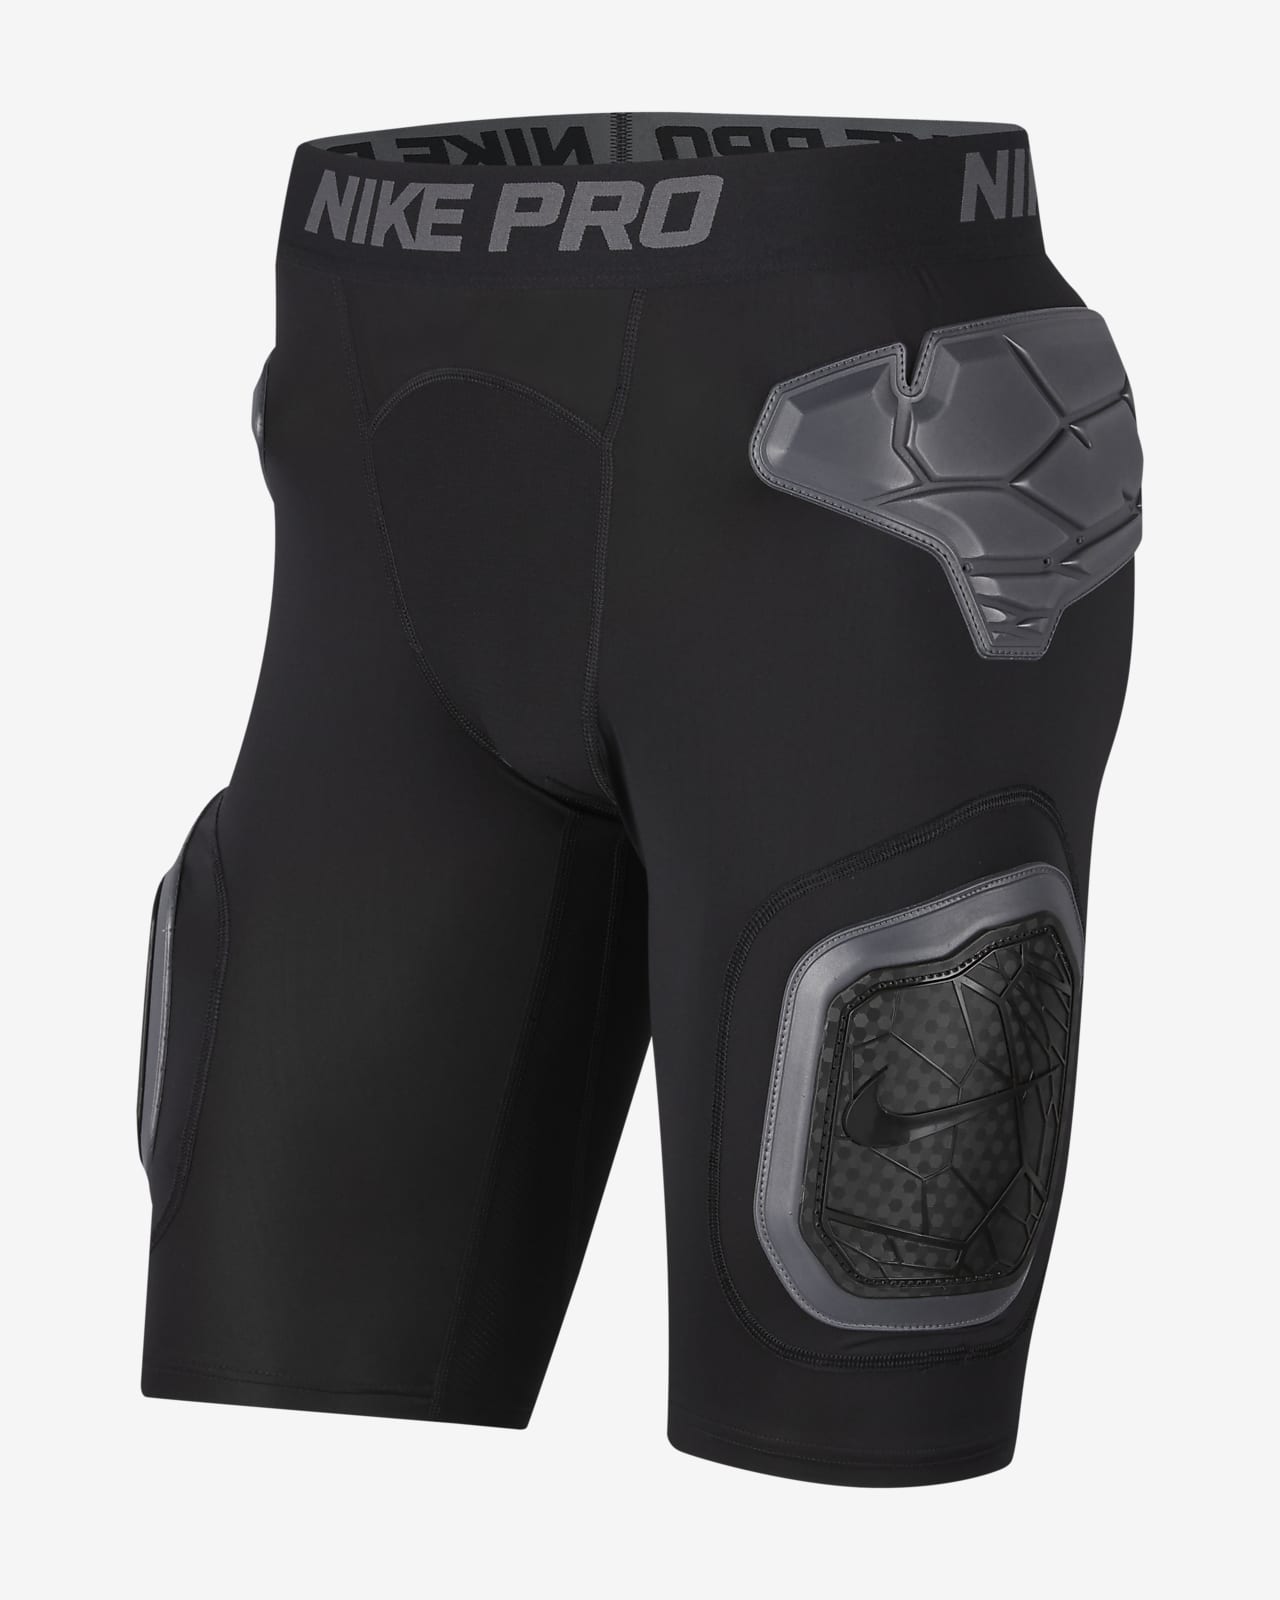 hyperstrong padded compression shorts for basketball